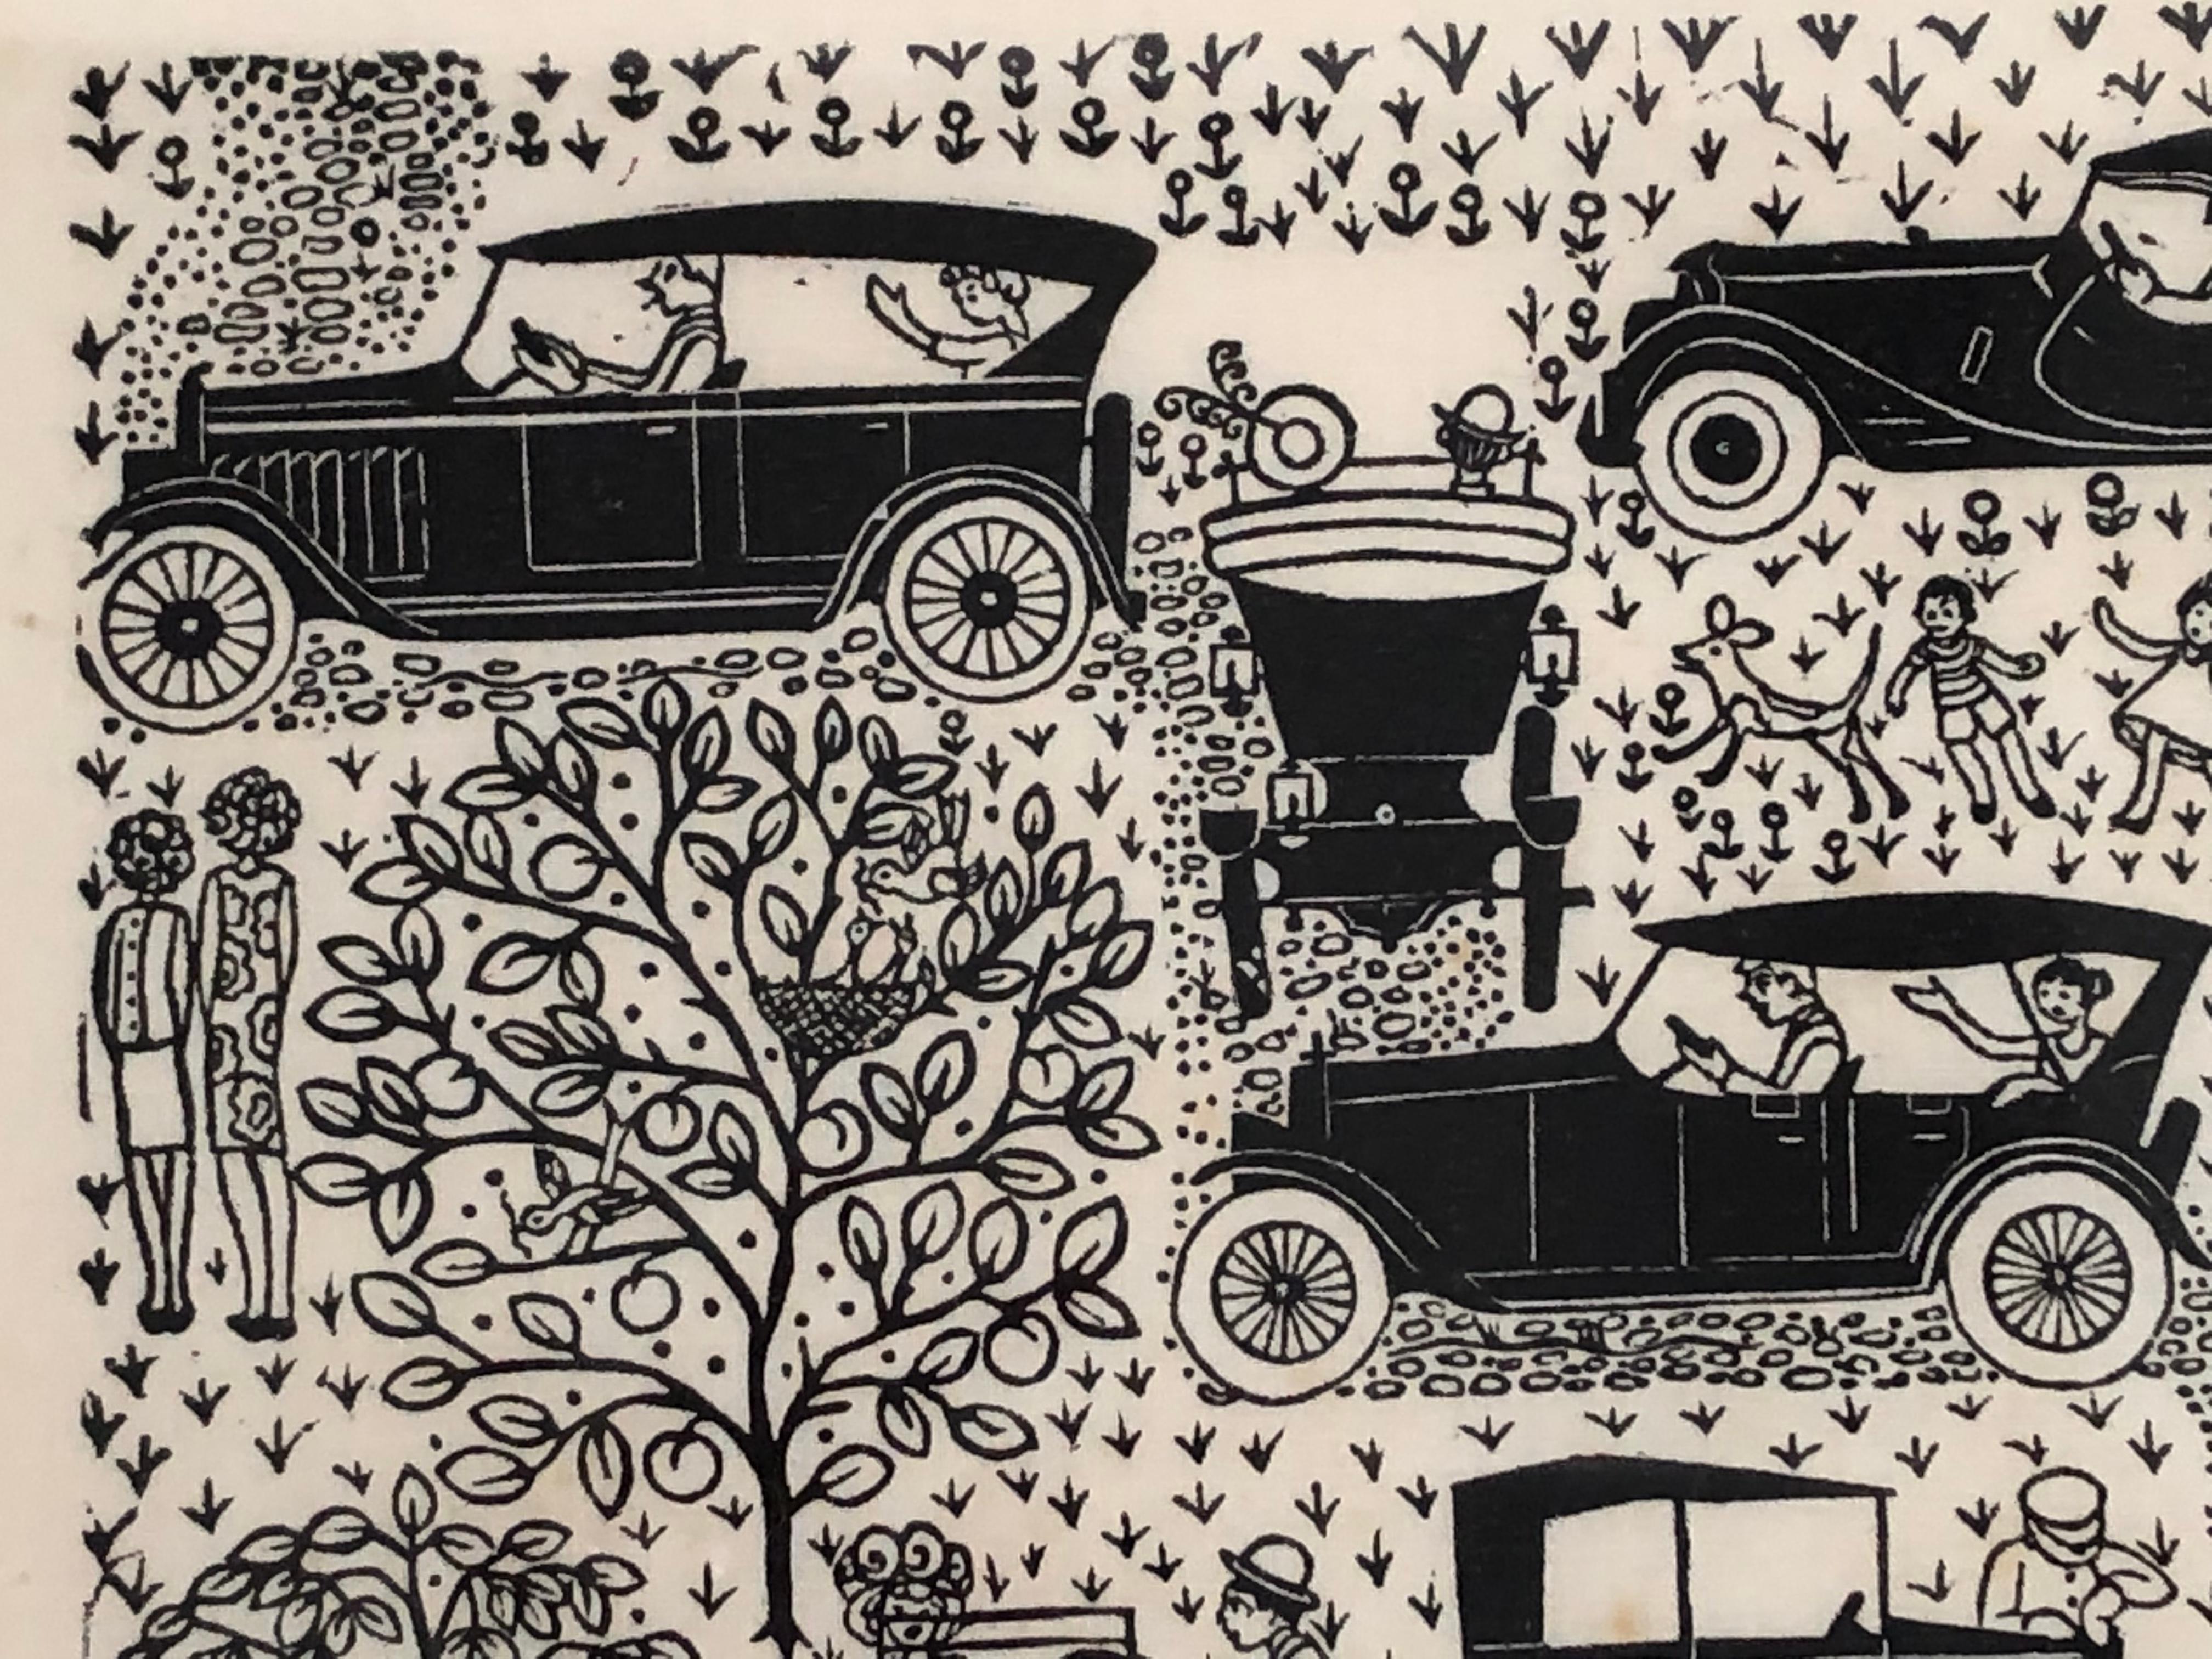 Glass Folly Cove Designers Hand Block Printed Textile with Antique Automobiles